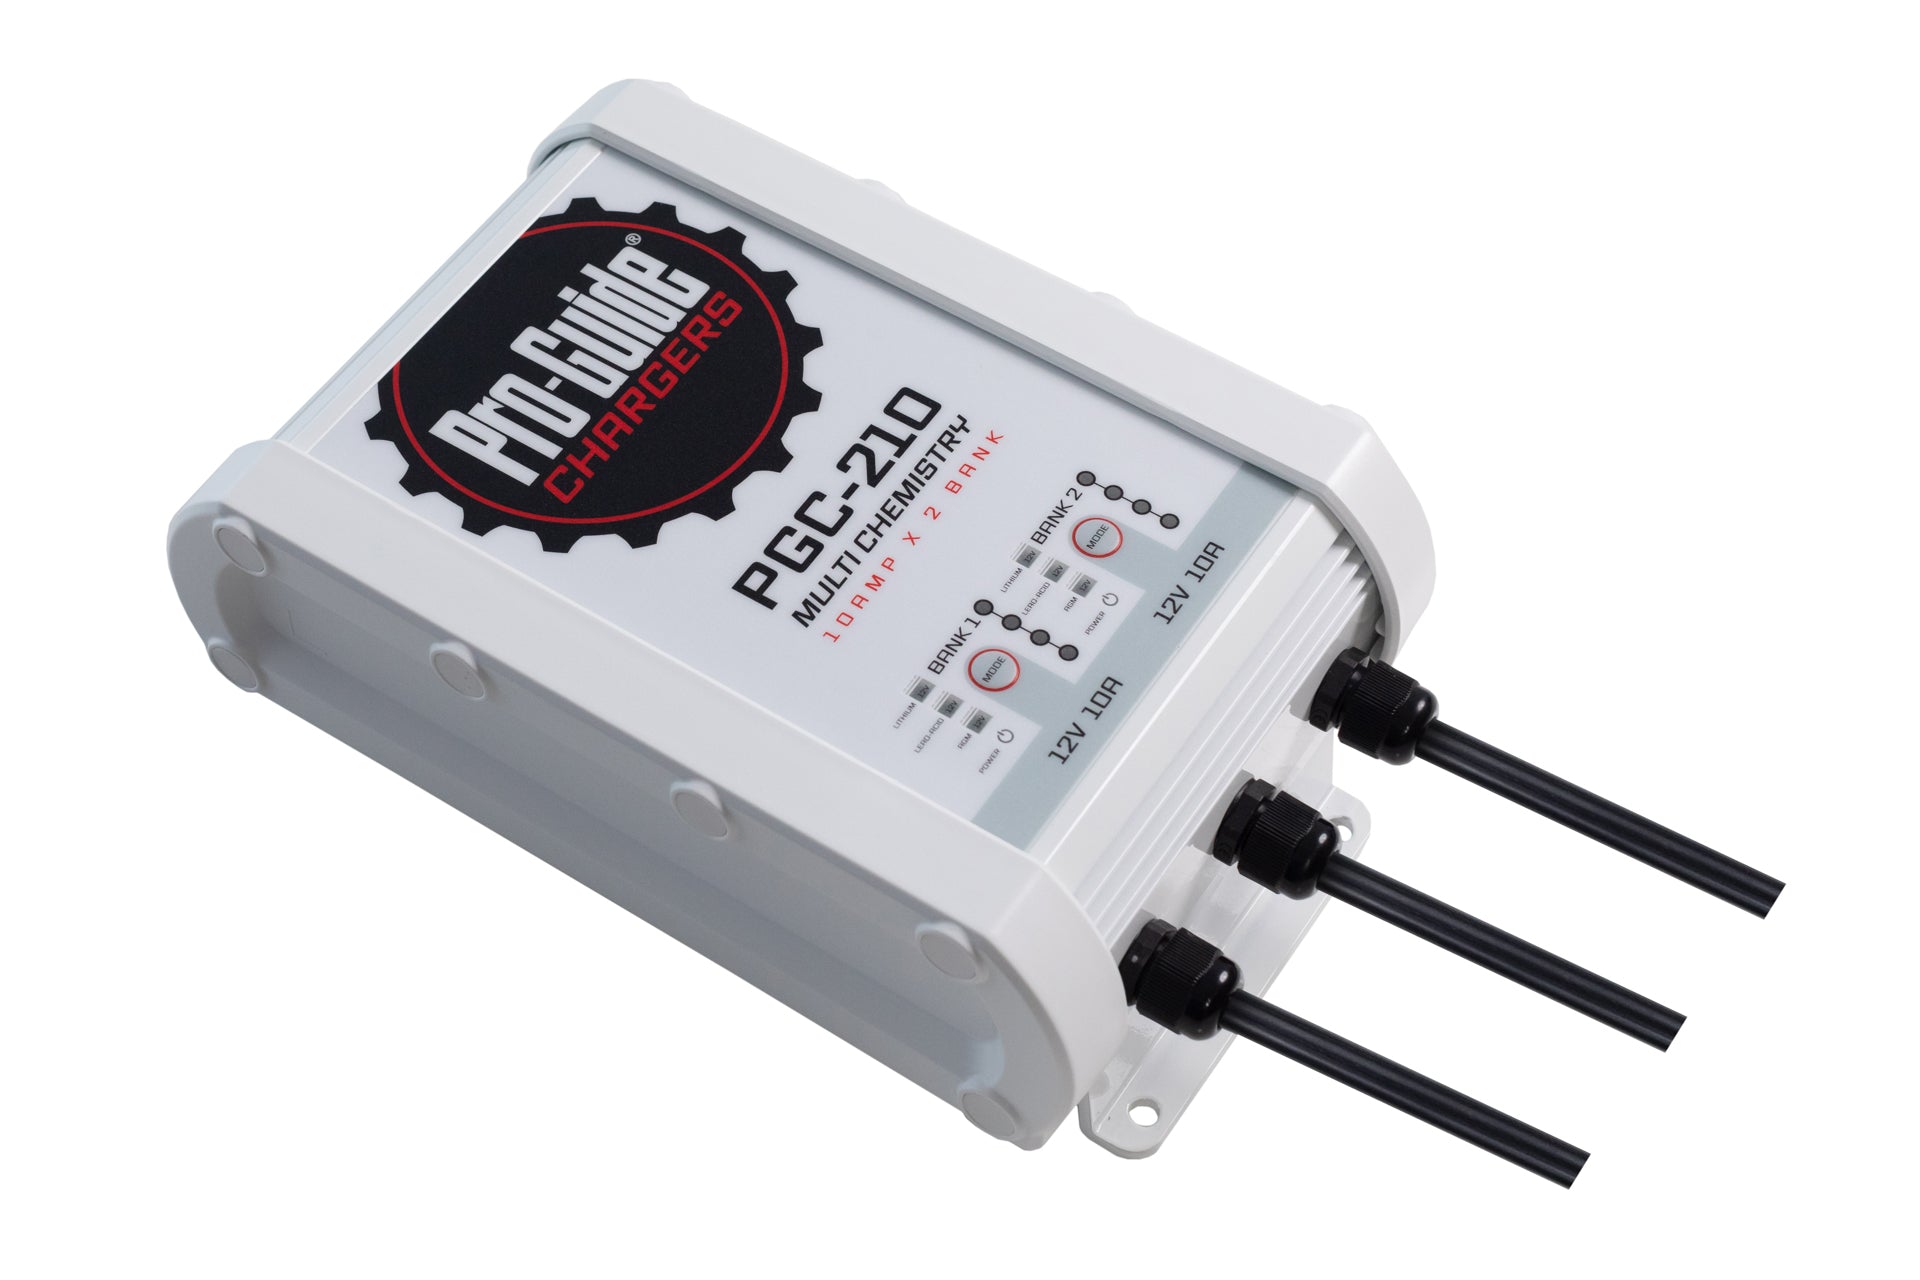 PGC-210 | 12V 2-Bank, 10-Amp On-Board Battery Charger